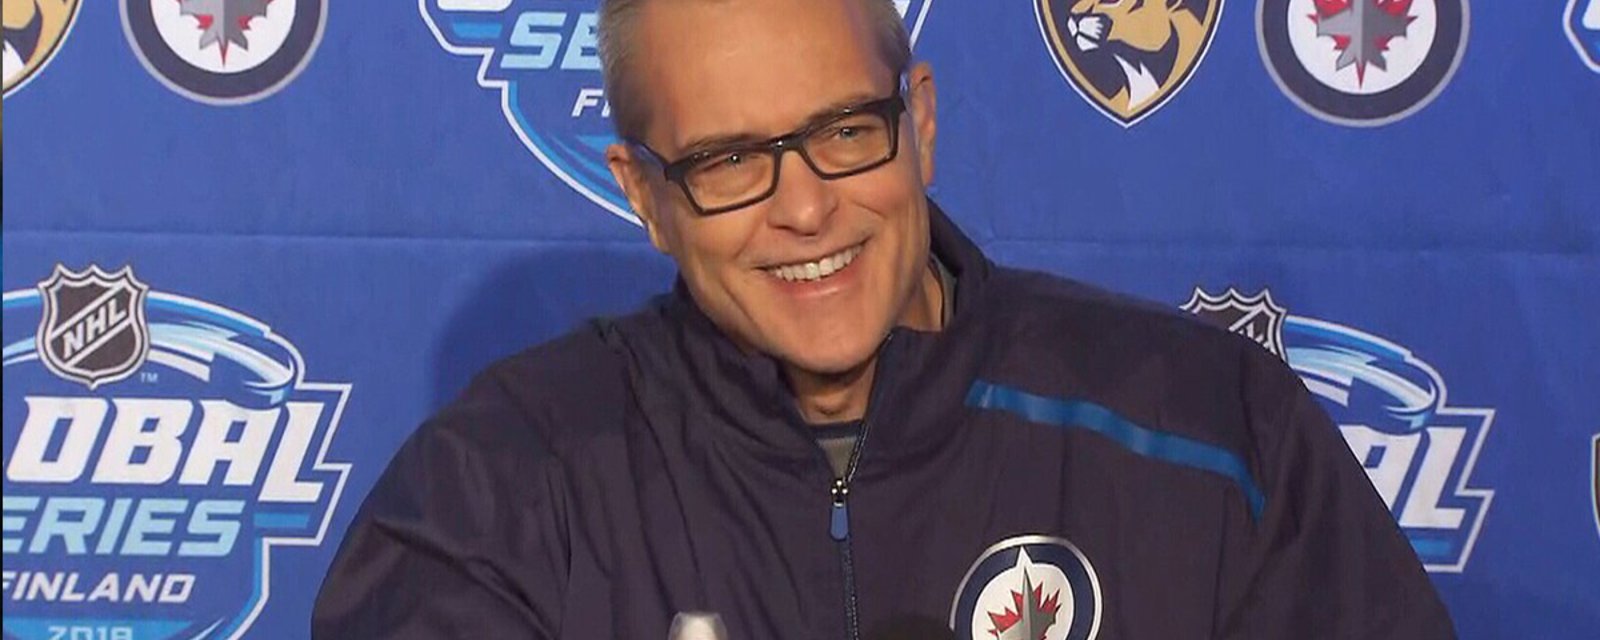 Jets coach Maurice loses it when asked “Who’s the Daddy” by Finnish media